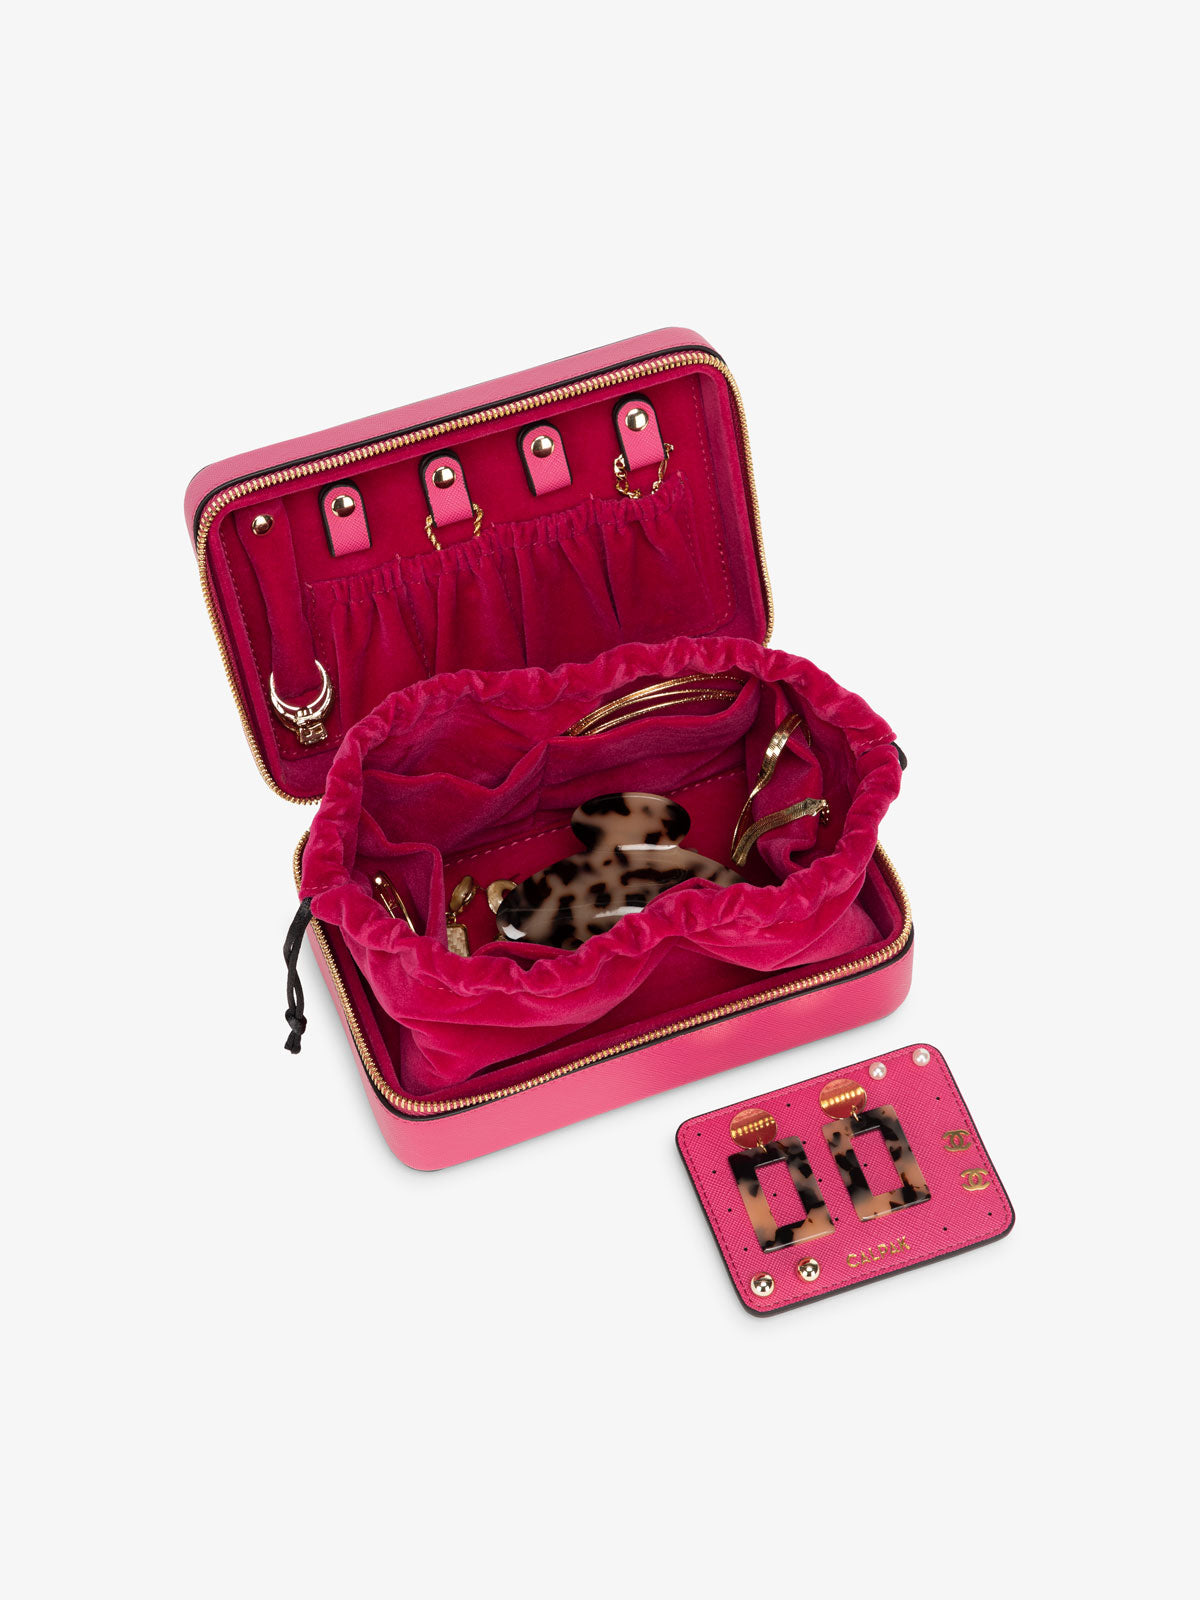 zippered jewelry box for women in pink dragonfruit